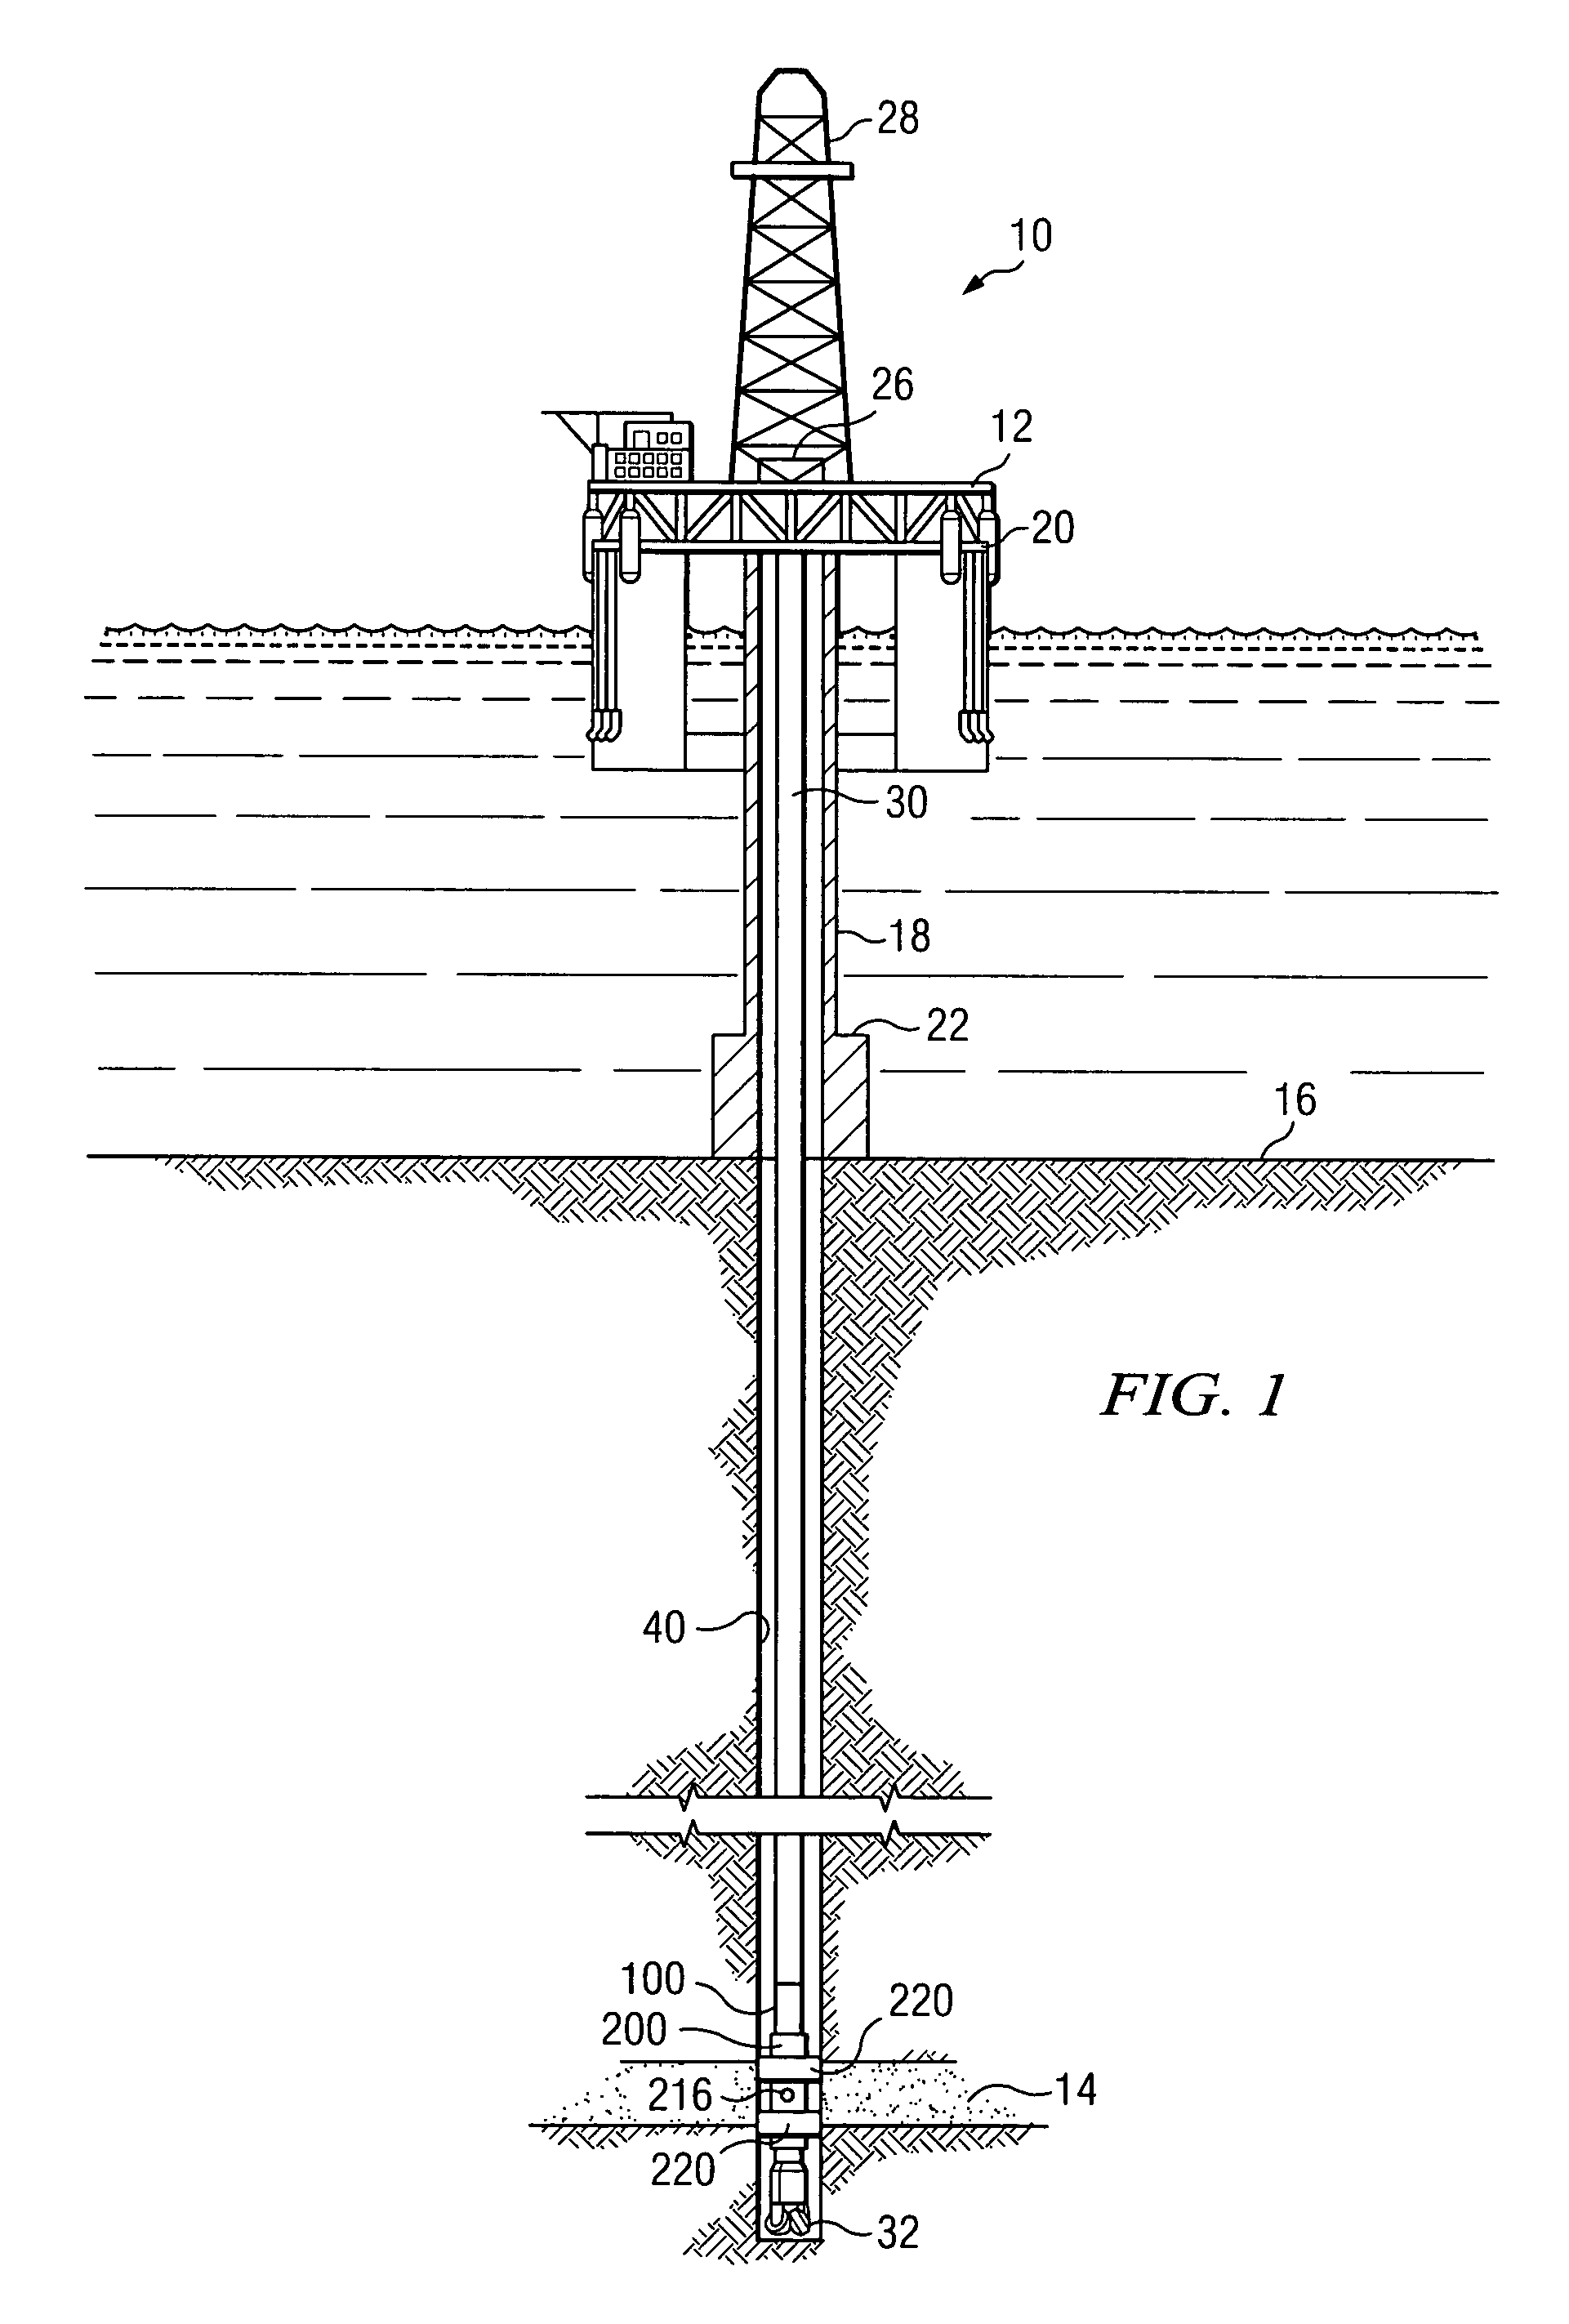 Apparatus for obtaining high quality formation fluid samples